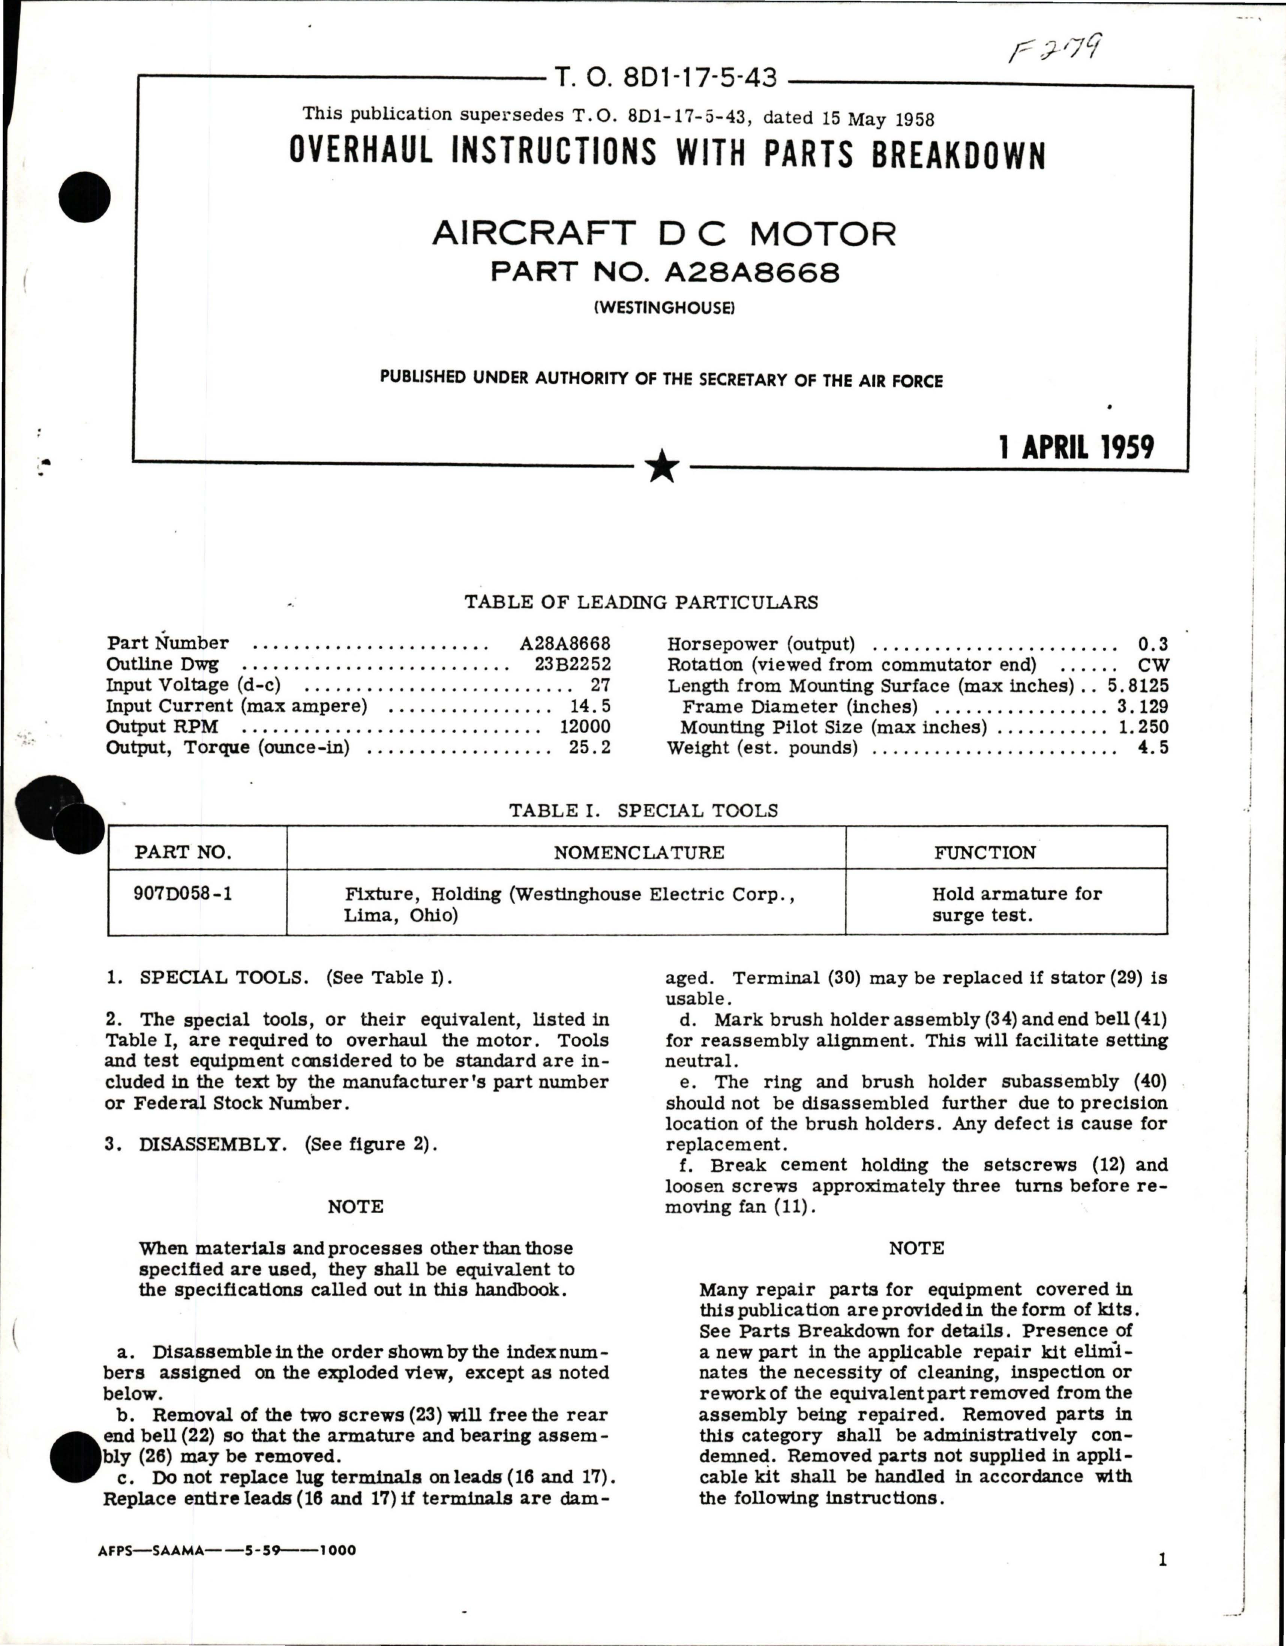 Sample page 1 from AirCorps Library document: Overhaul Instructions with Parts Breakdown for DC Motor - Part A28A8668